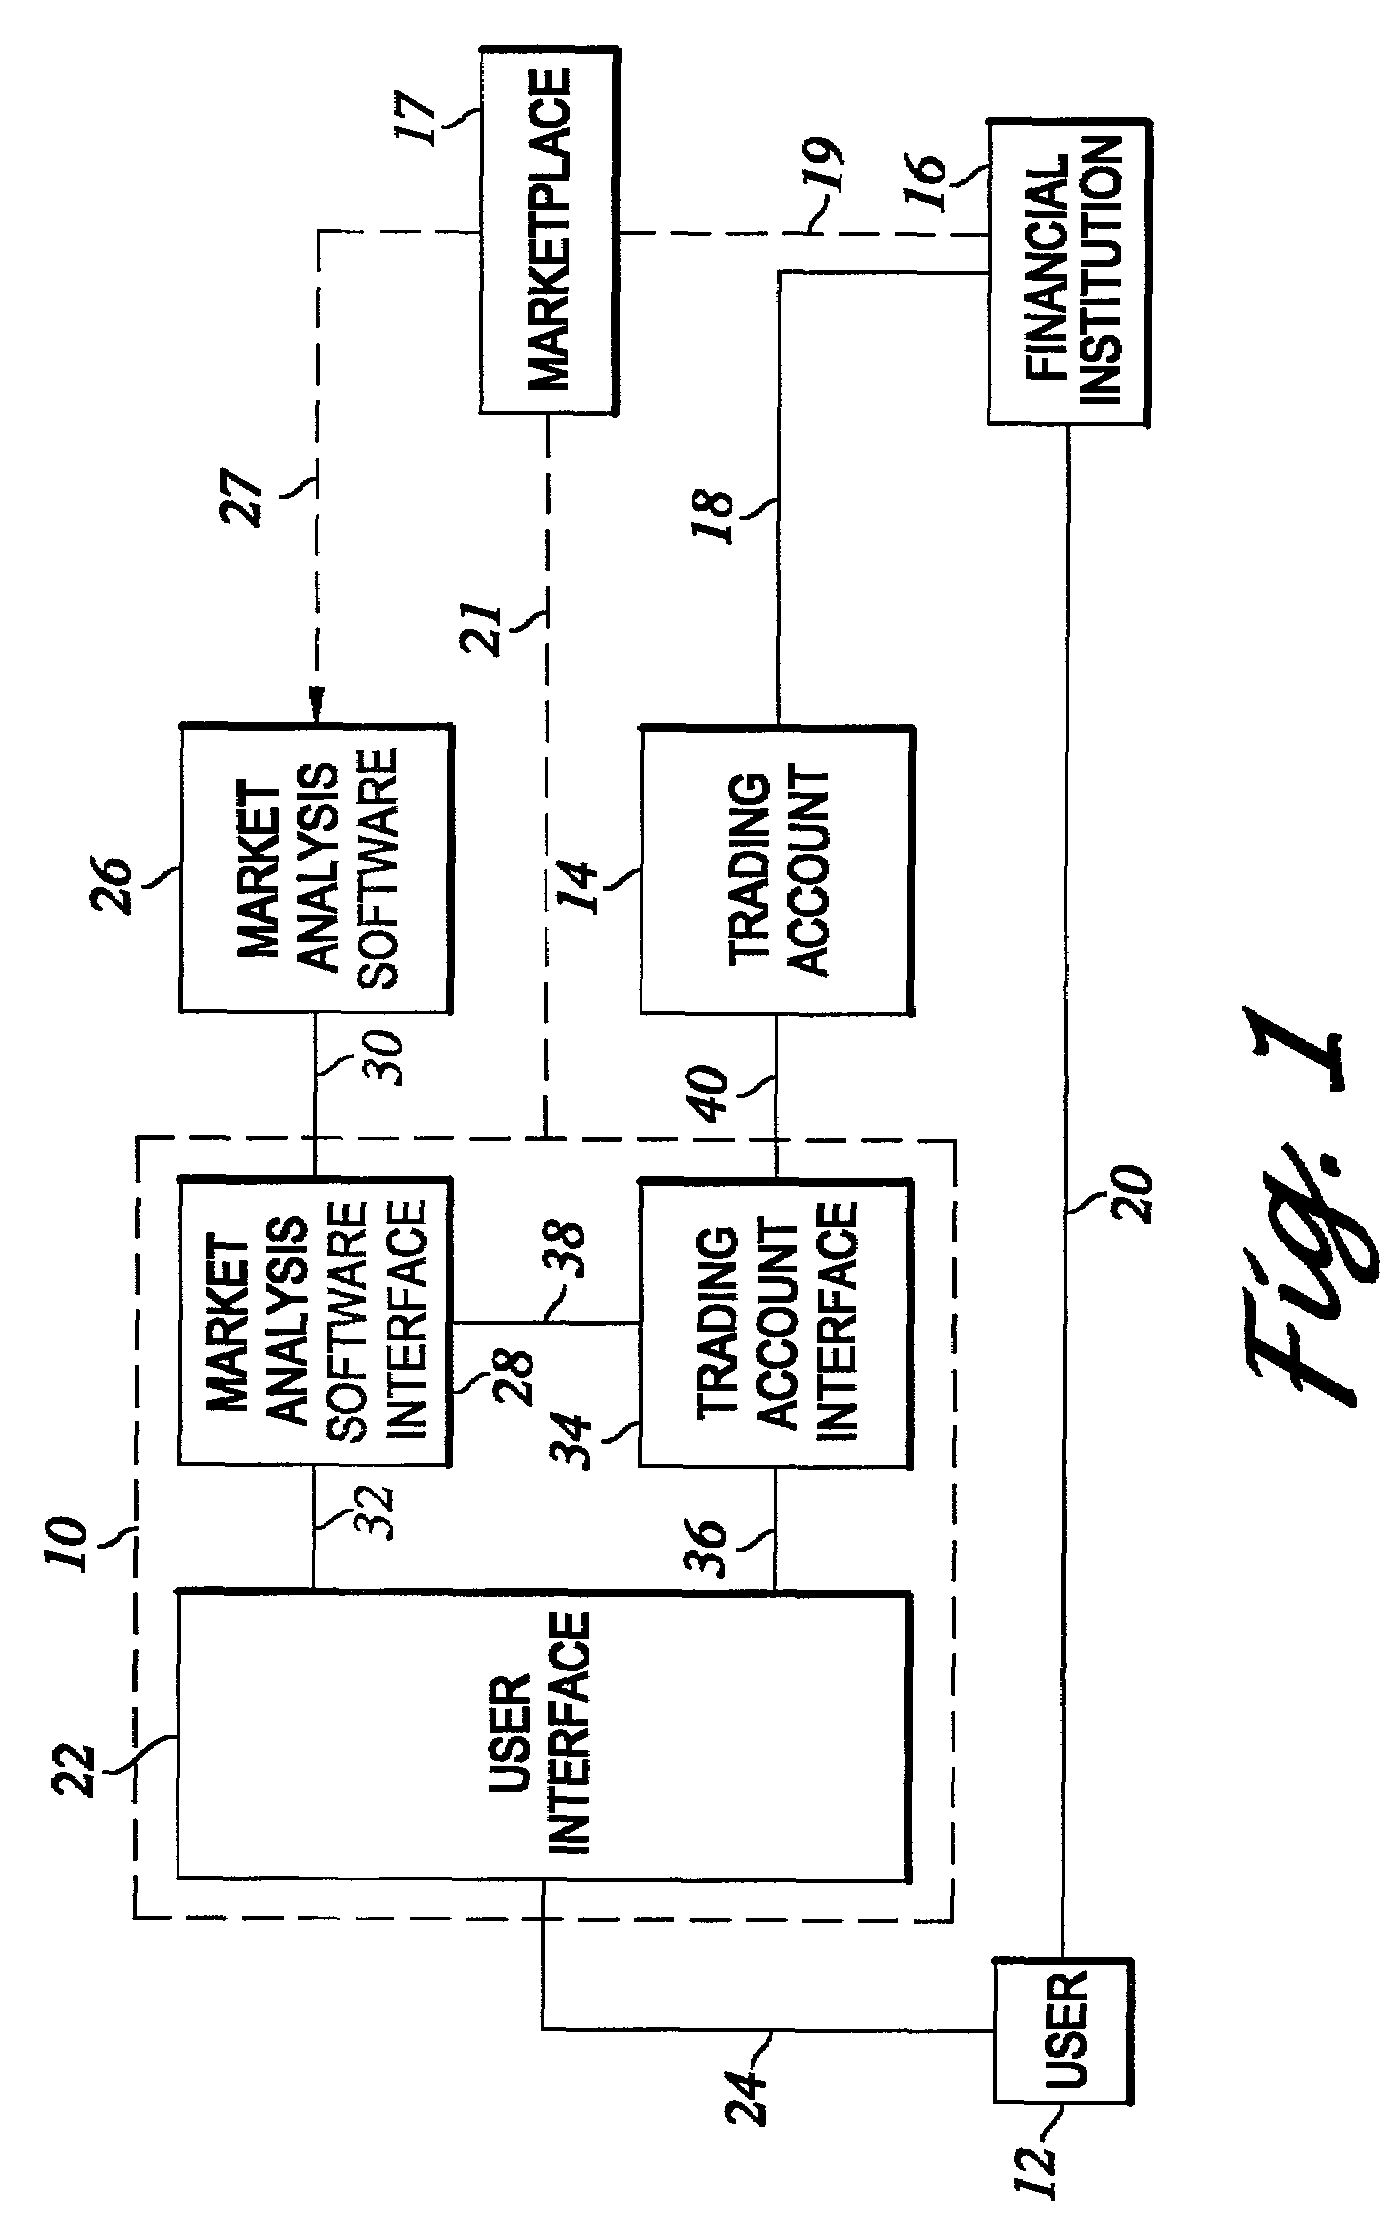 Method and system for the automated trading of financial instruments